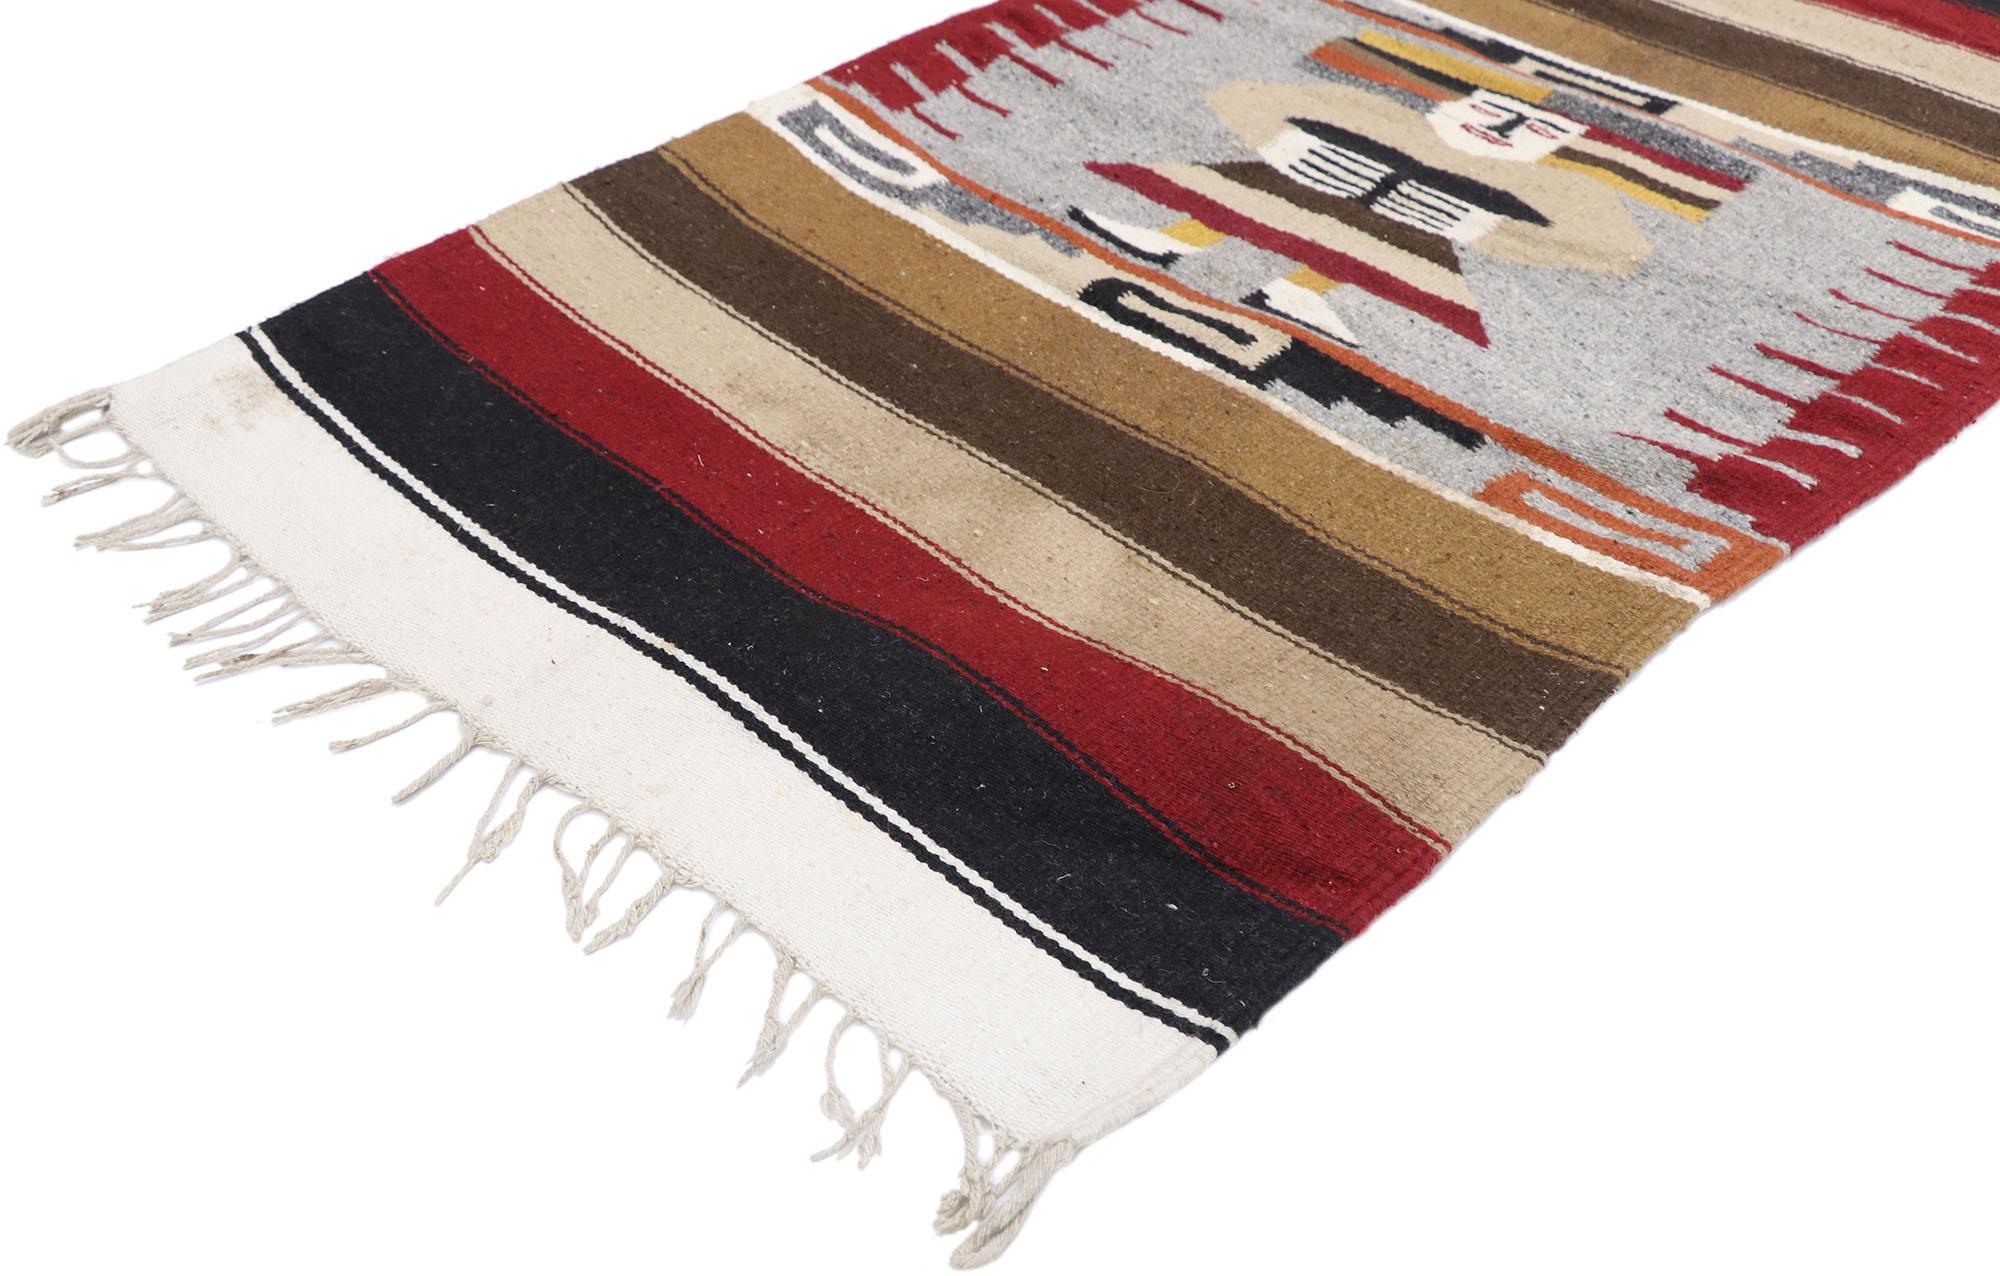 77849 Vintage Mexican blanket with Mayan Aztec Figure, 02'06 x 04'09. With its expressive design, incredible detail and texture, this handwoven wool vintage Mexican blanket is a captivating vision of woven beauty. The abrashed field features a Mayan